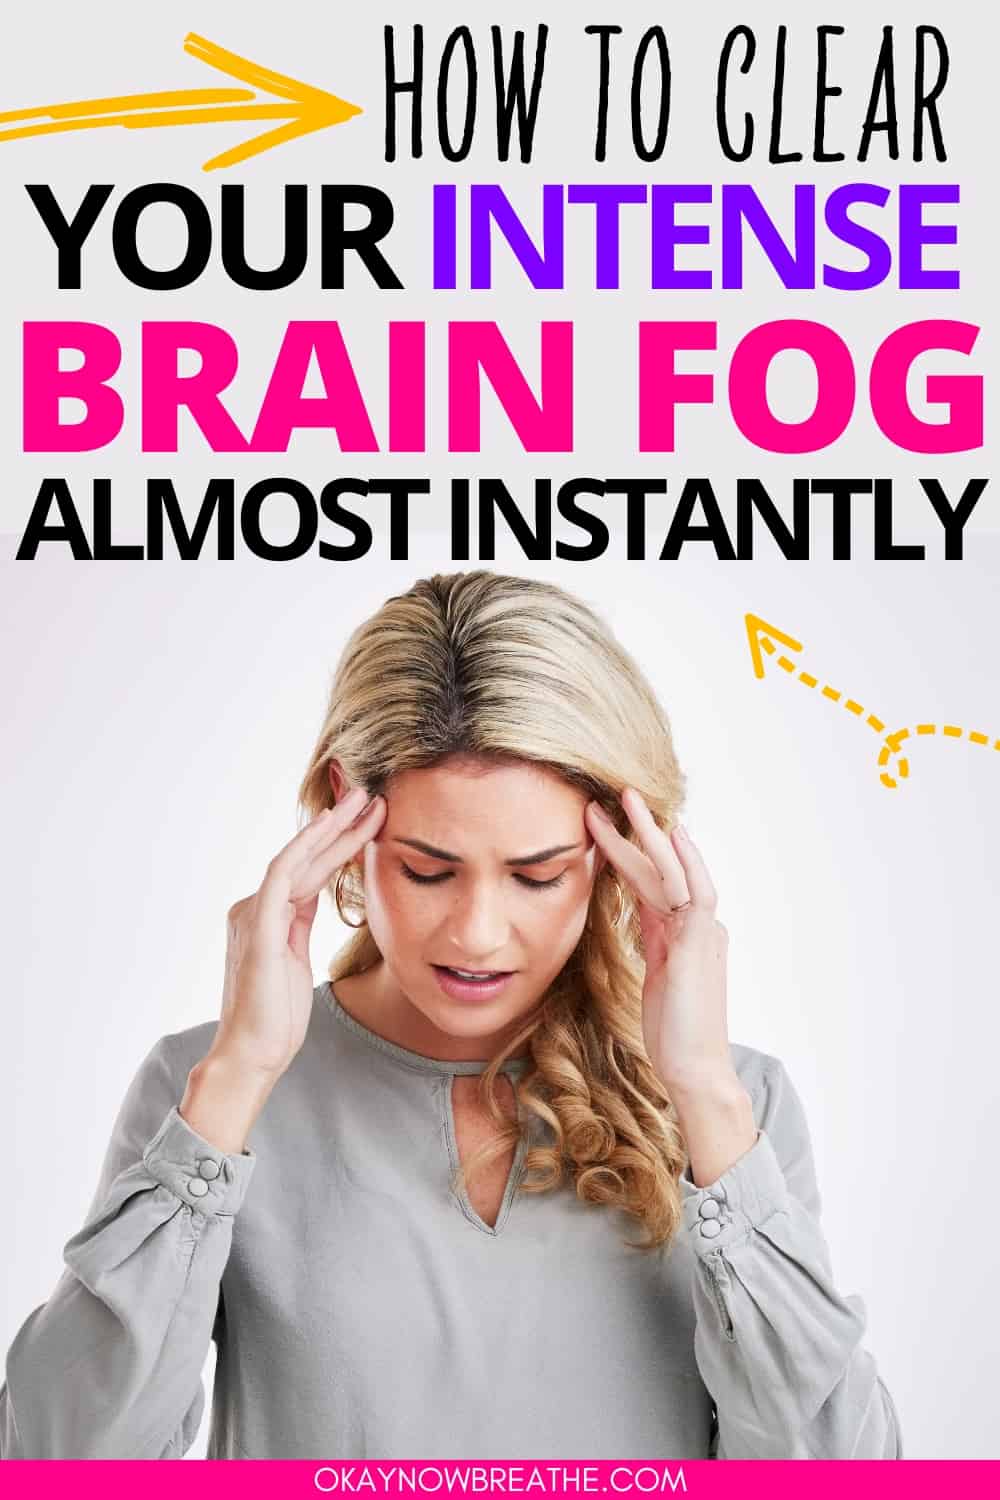 There is a female rubbing the temples on her forehead as she's looking down. Above here, there is text: How to Clear Your Intense Brain Fog Almost Instantly.